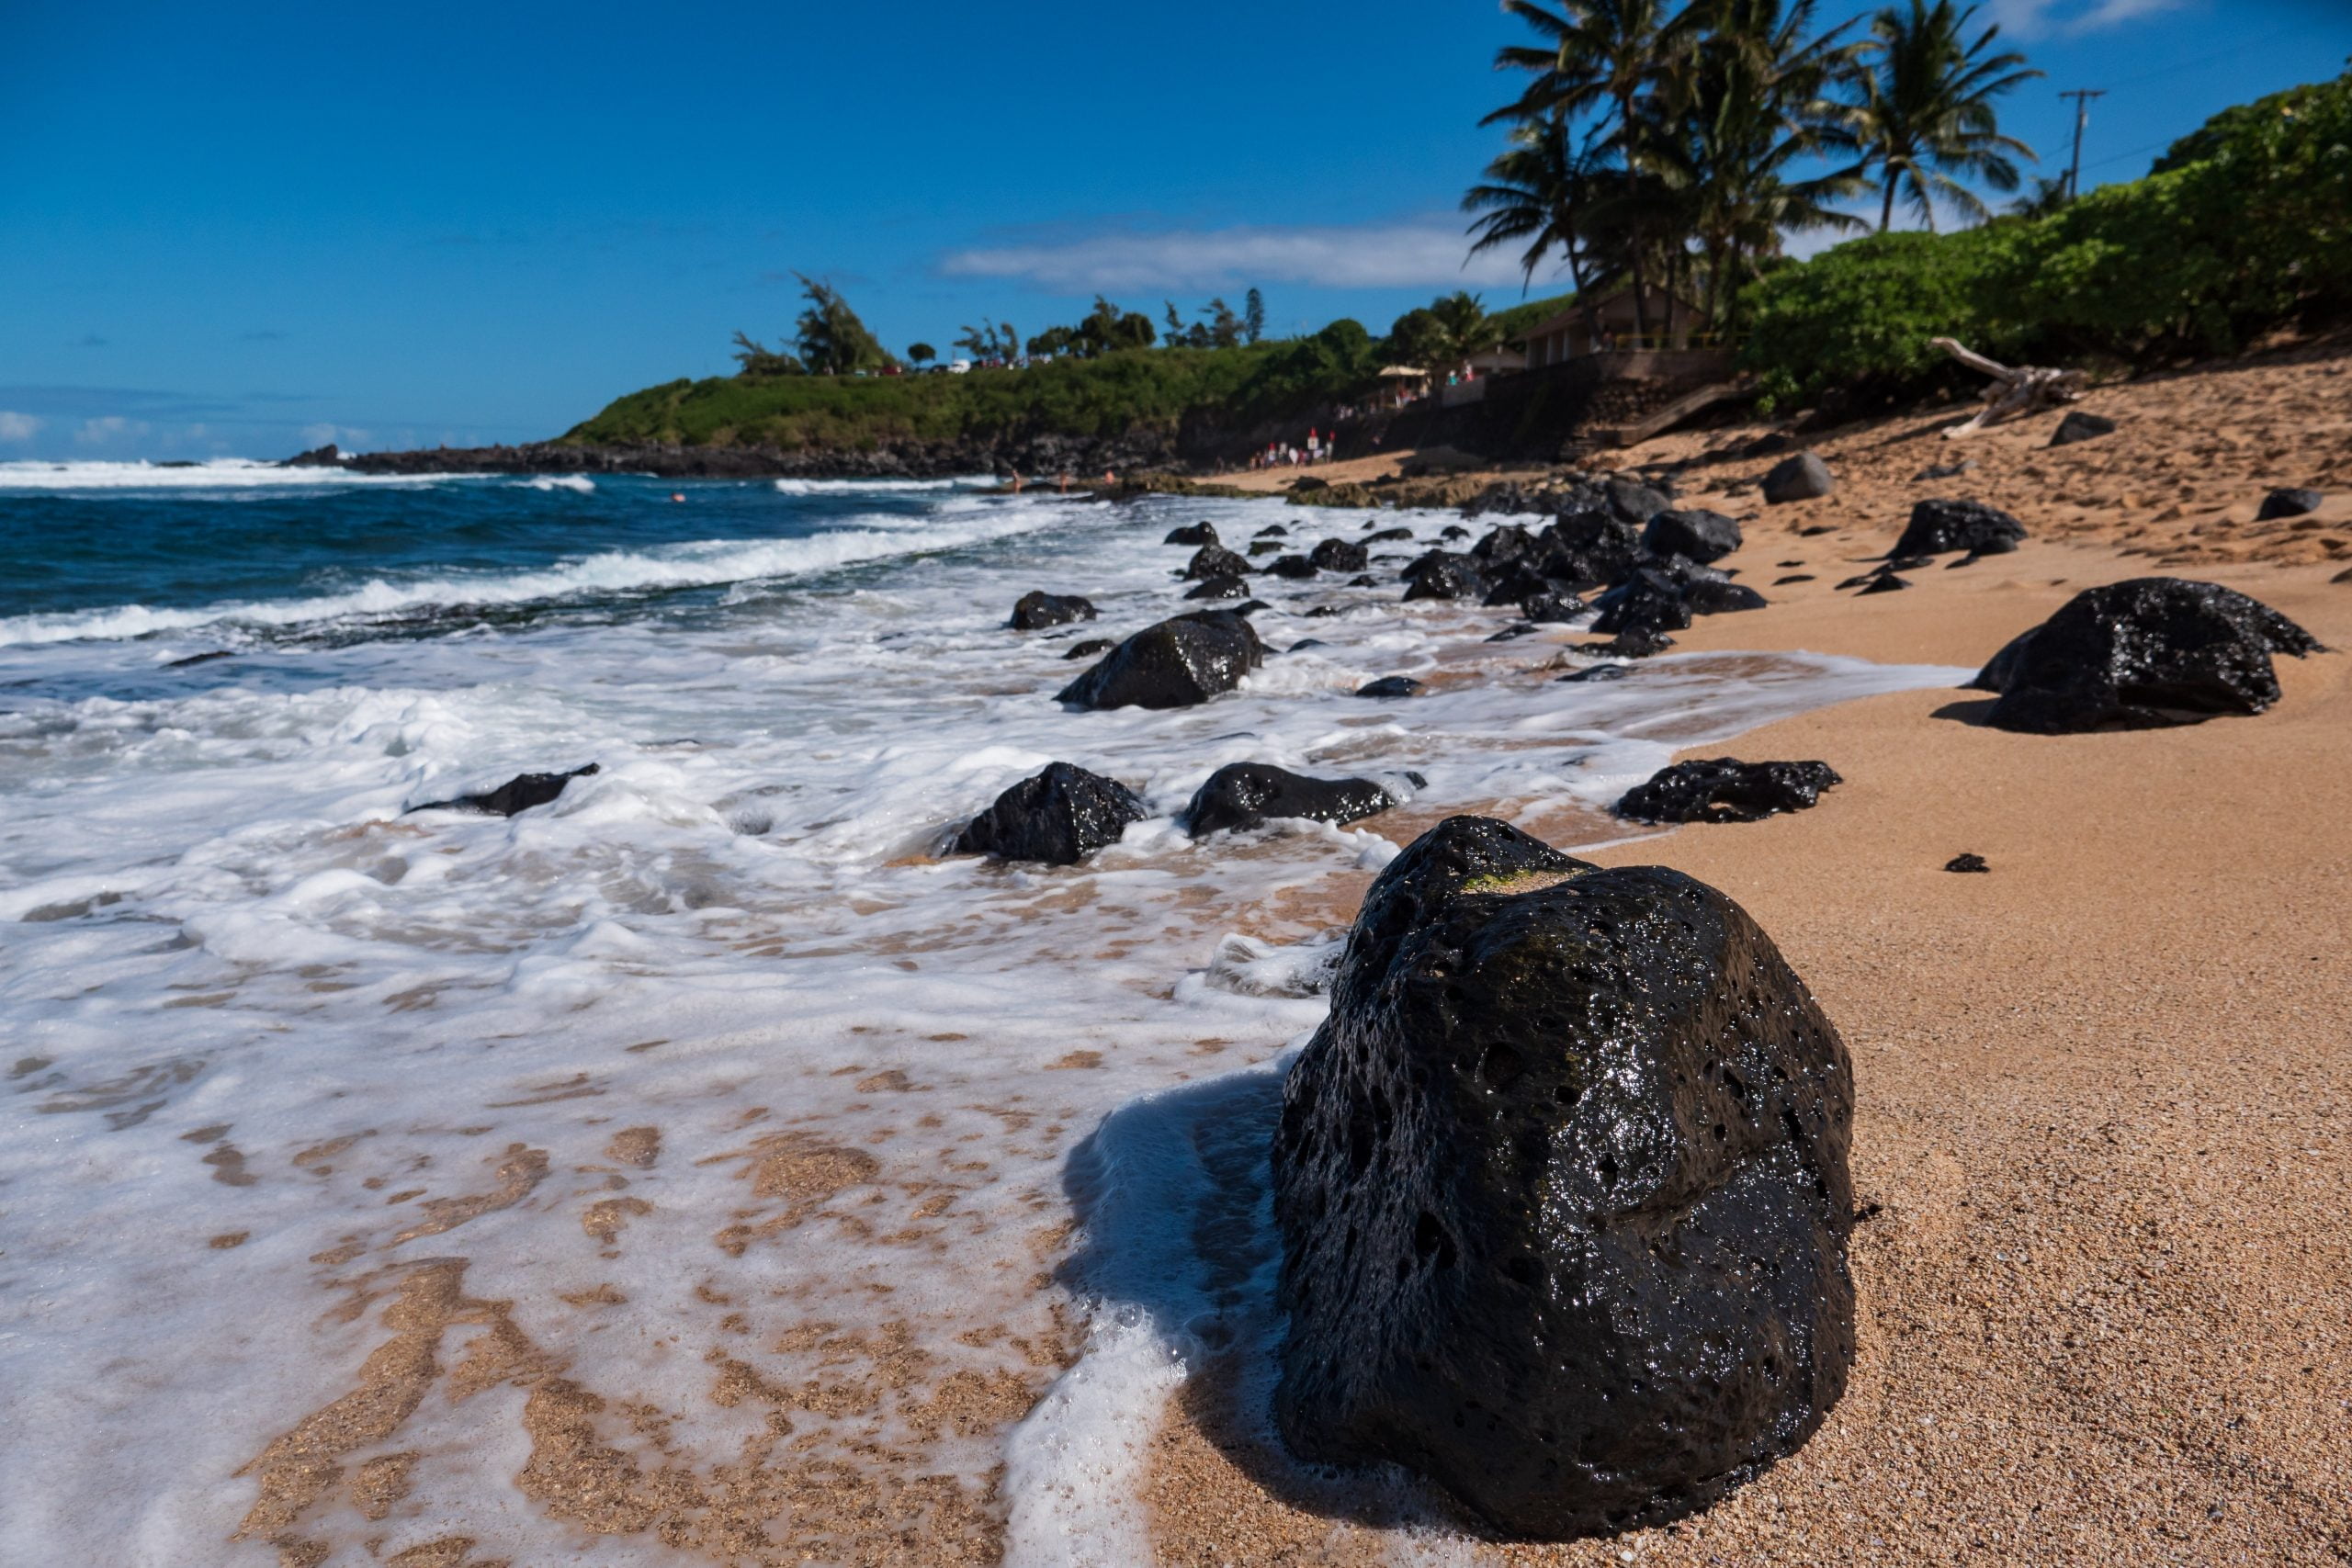 Here Today but Gone to Maui? How to Ask About Vacation Policy During Job Interviews Without Seeming Selfish